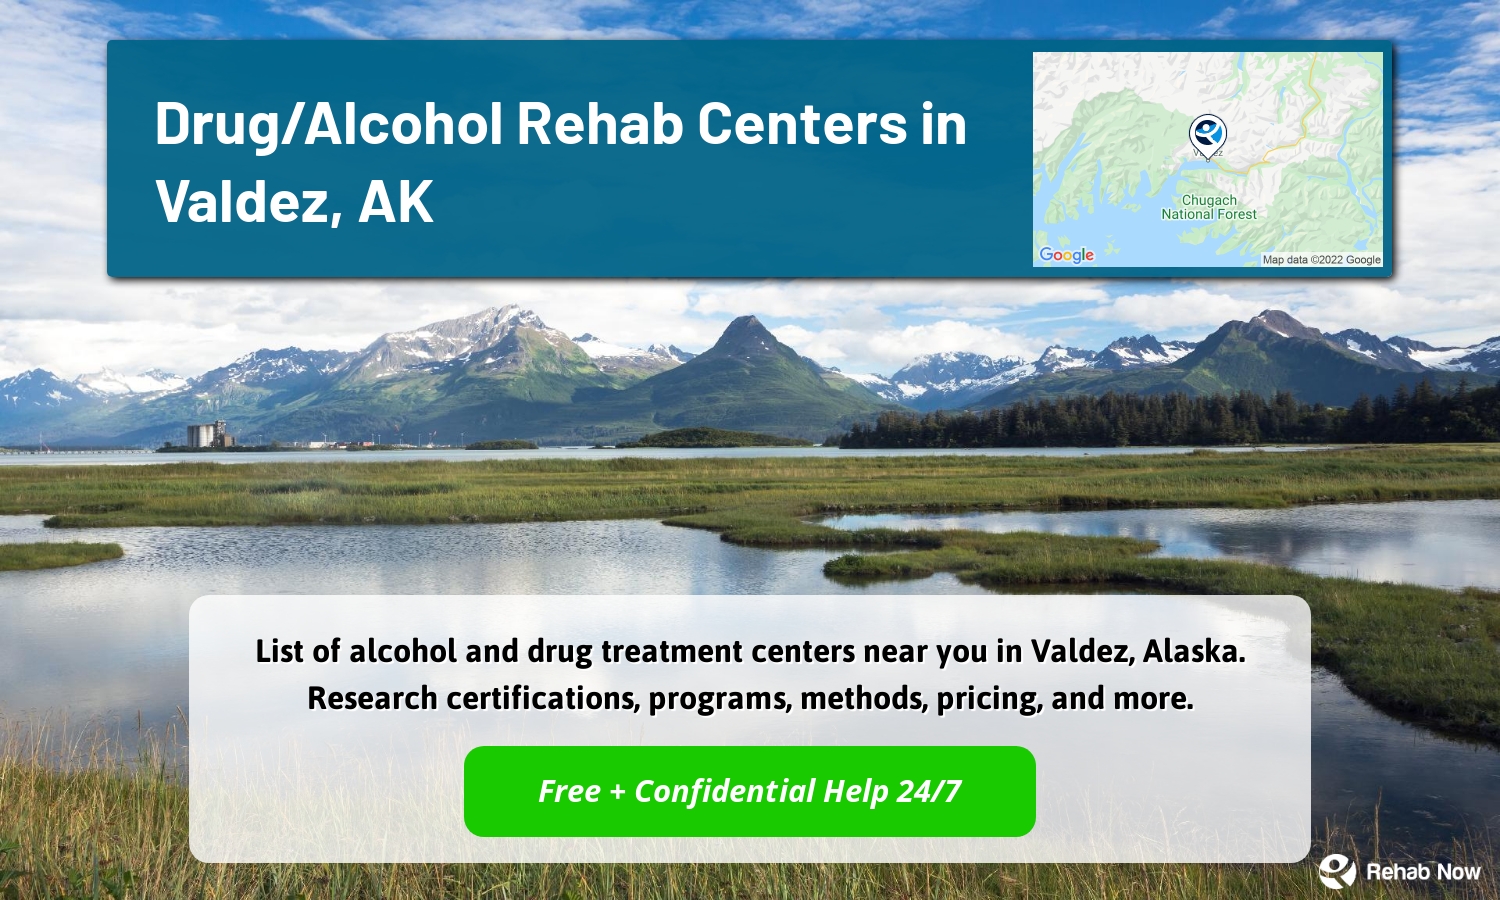 List of alcohol and drug treatment centers near you in Valdez, Alaska. Research certifications, programs, methods, pricing, and more.